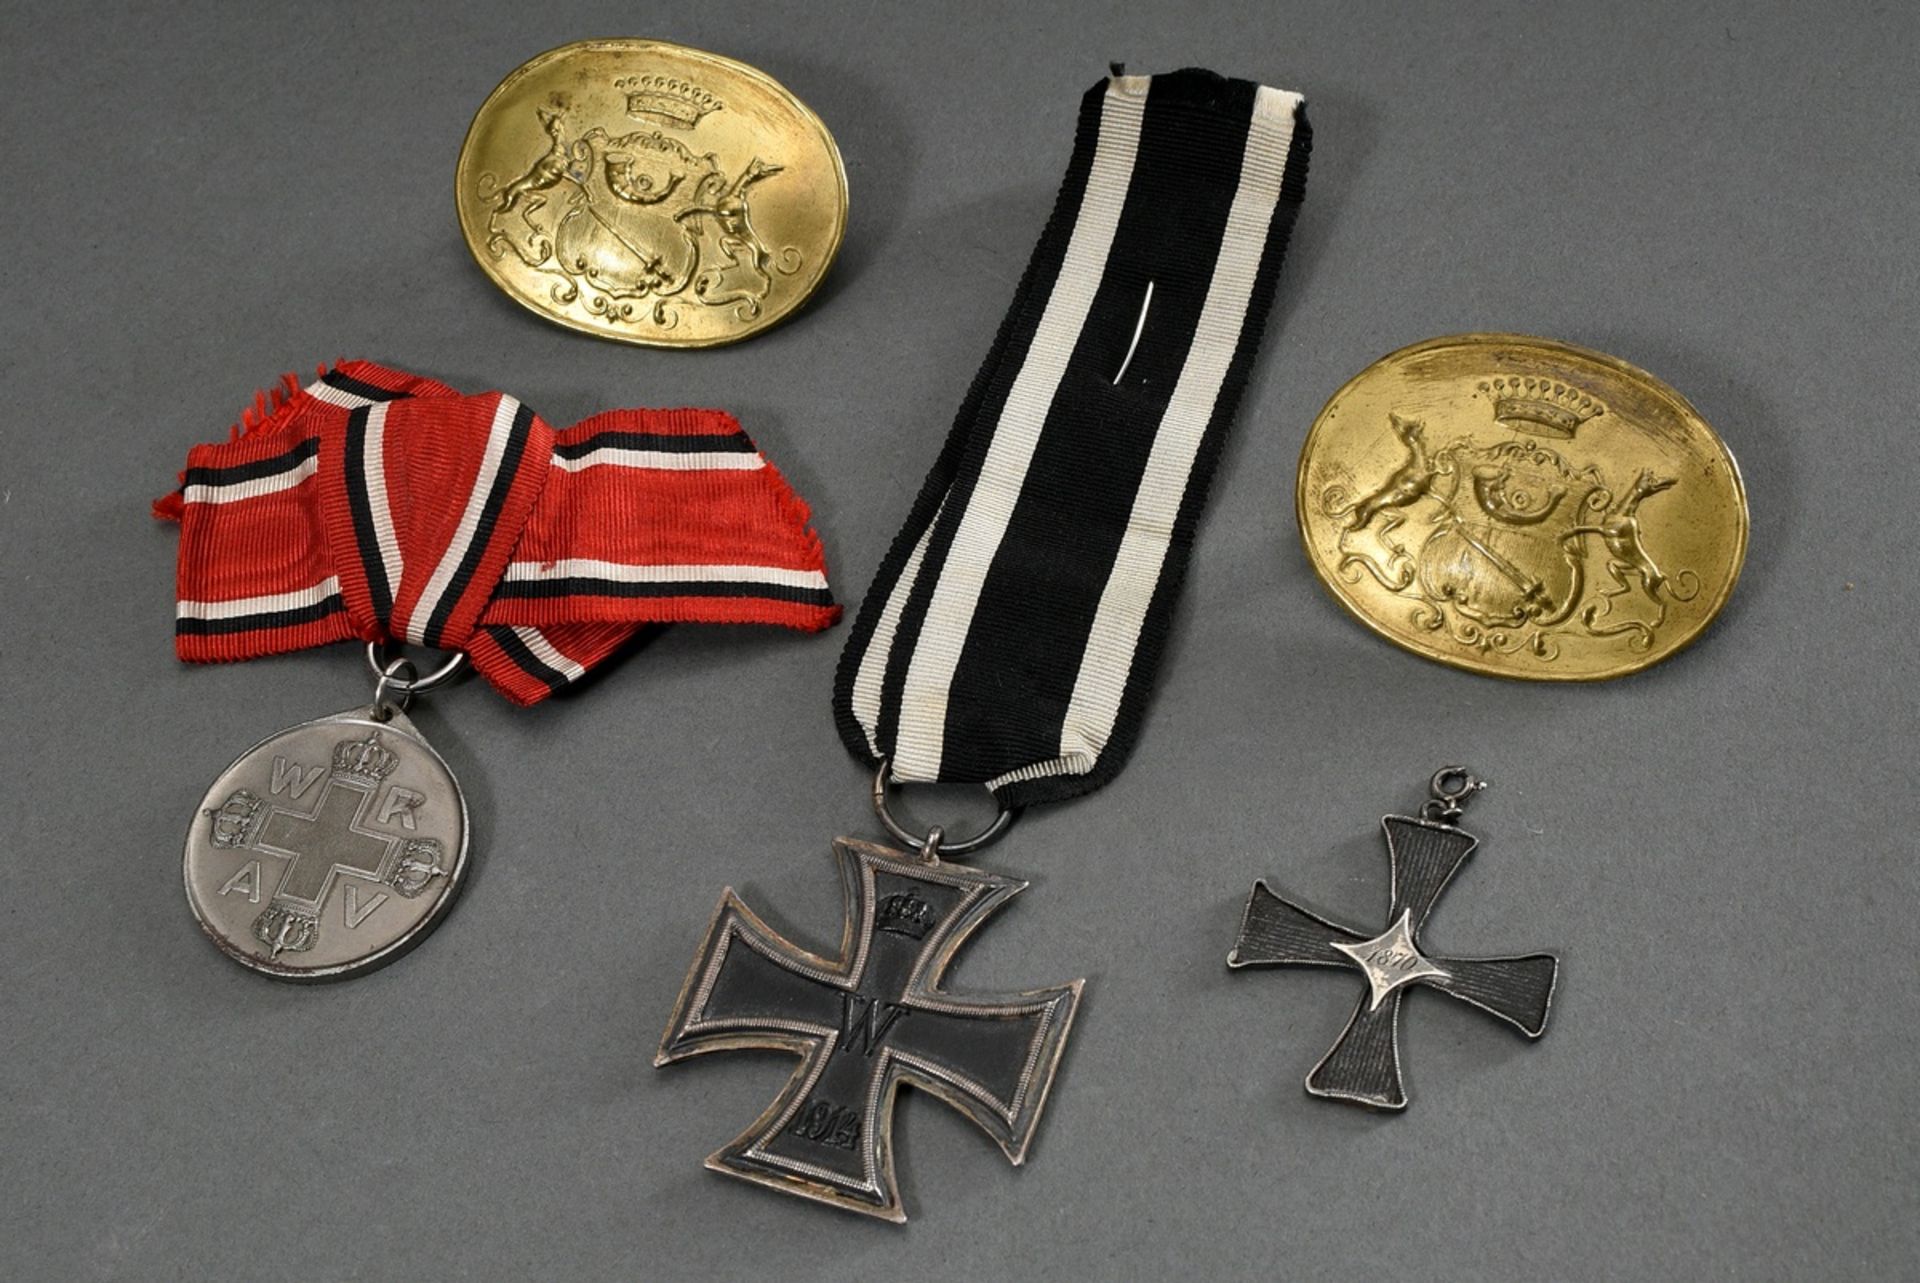 5 Various parts of medals and decorations: 1 Iron Cross 2nd class with ribbon (4,2x4,2cm), 1 Red Cr